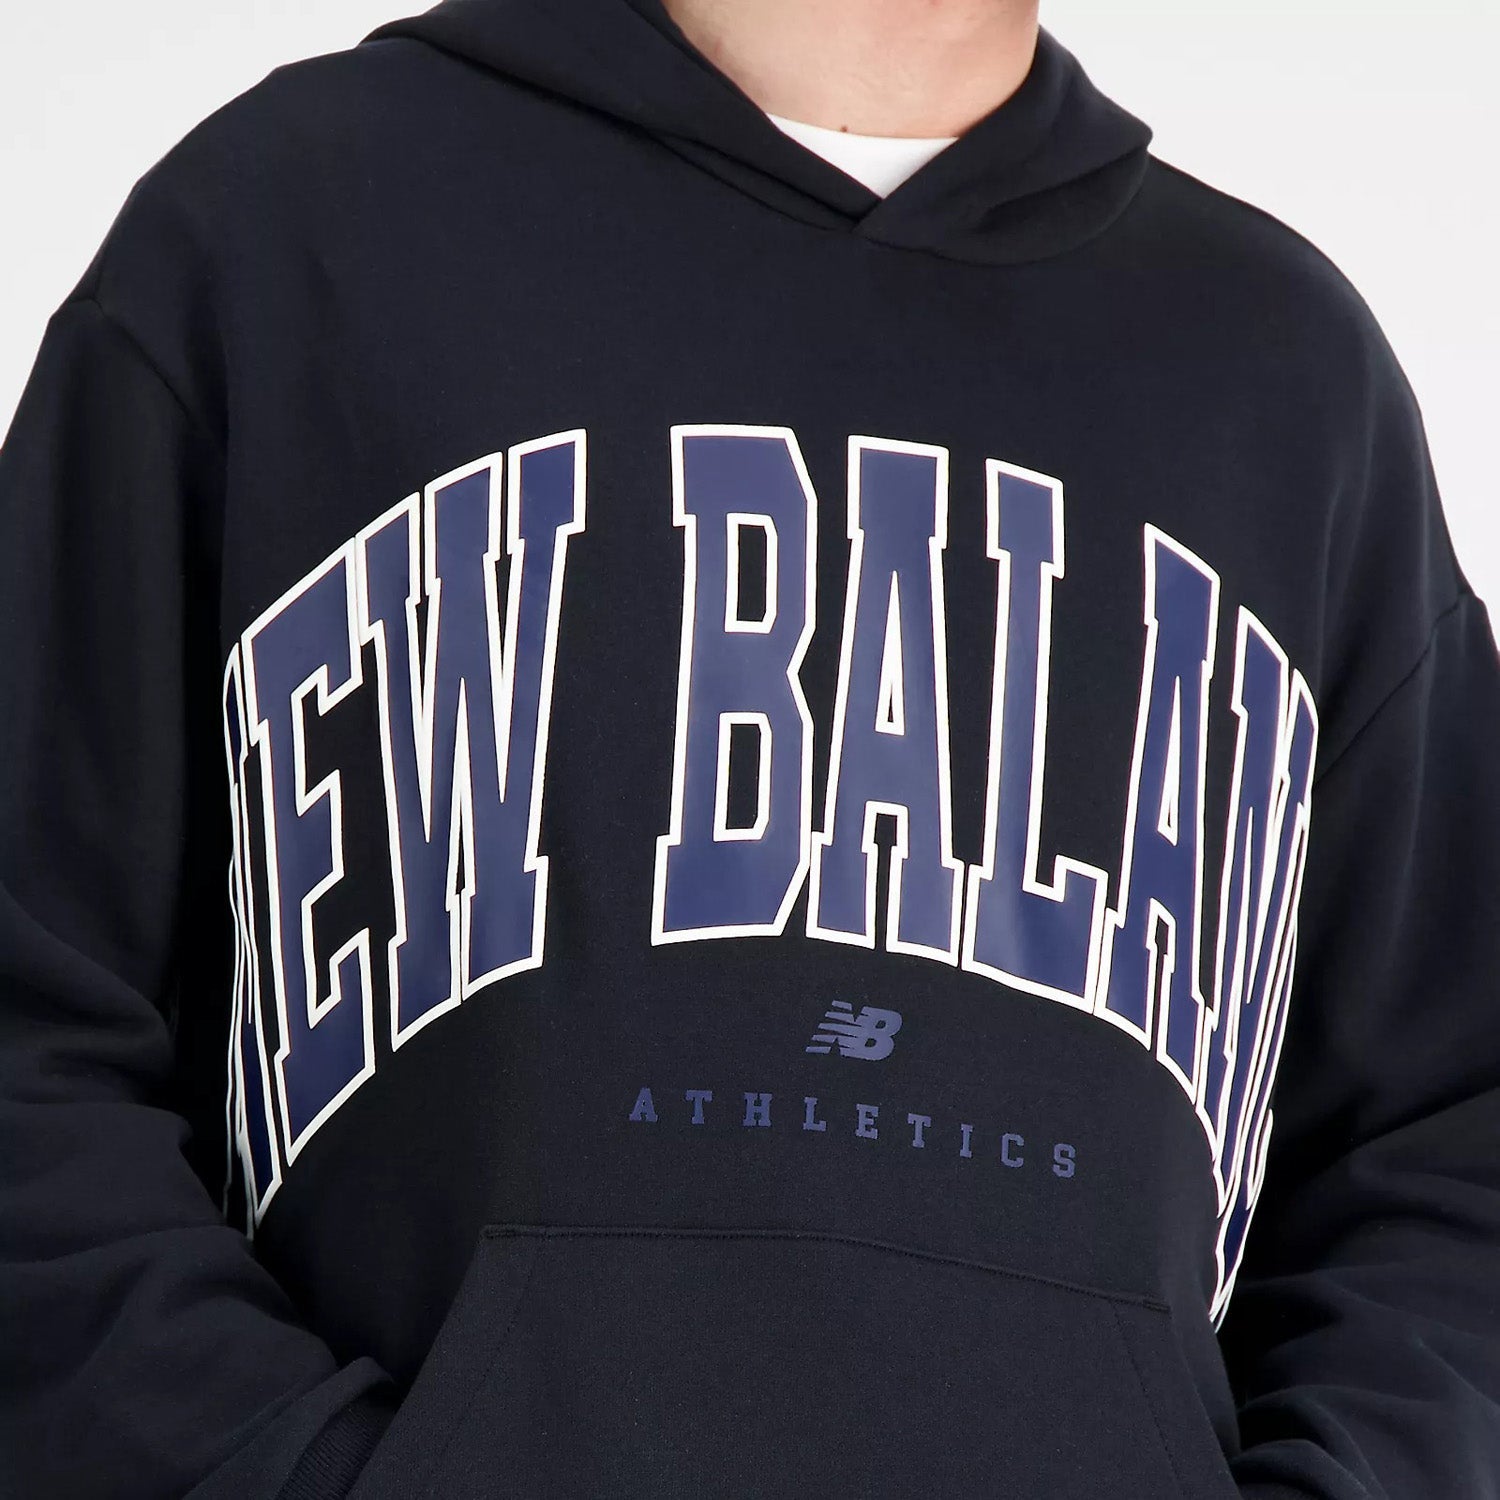 New Balance Uni-ssentials Warped Classics French Terry Hoodie Black UT31550-BLK - SWEATERS - Canada